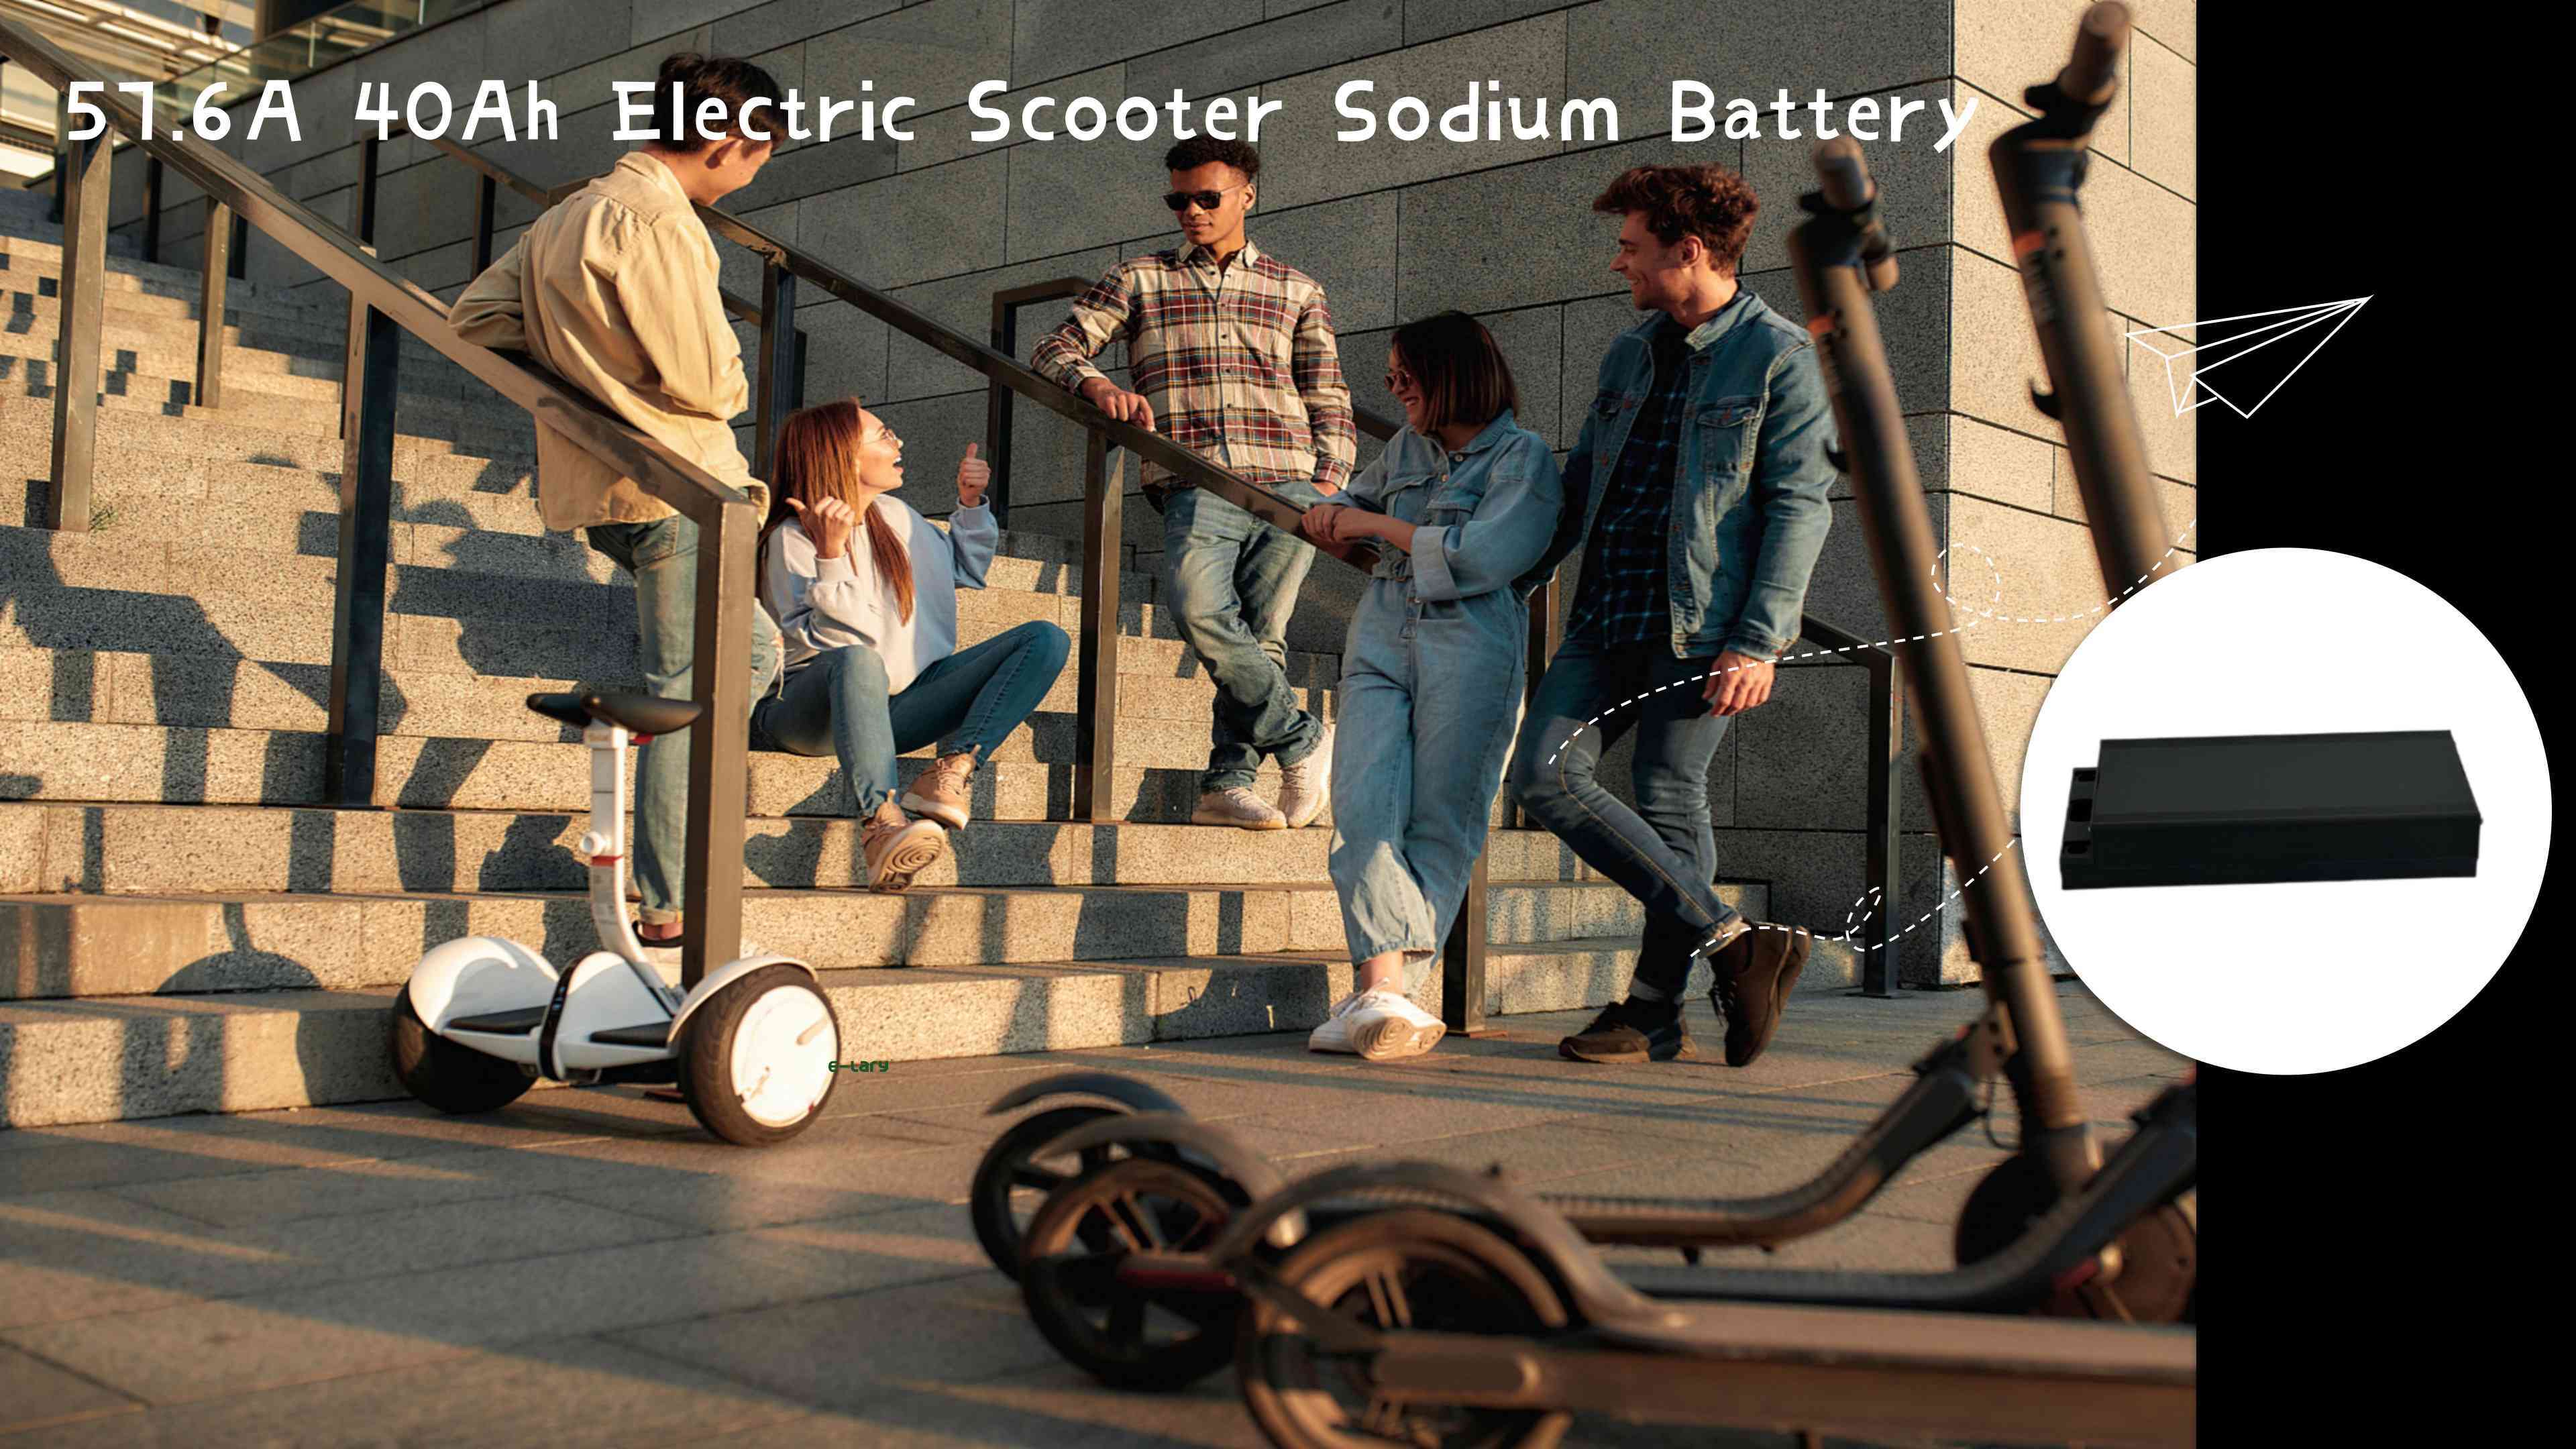 E-lary 57.6V 40Ah Super Electric Scooter Sodium-ion Battery